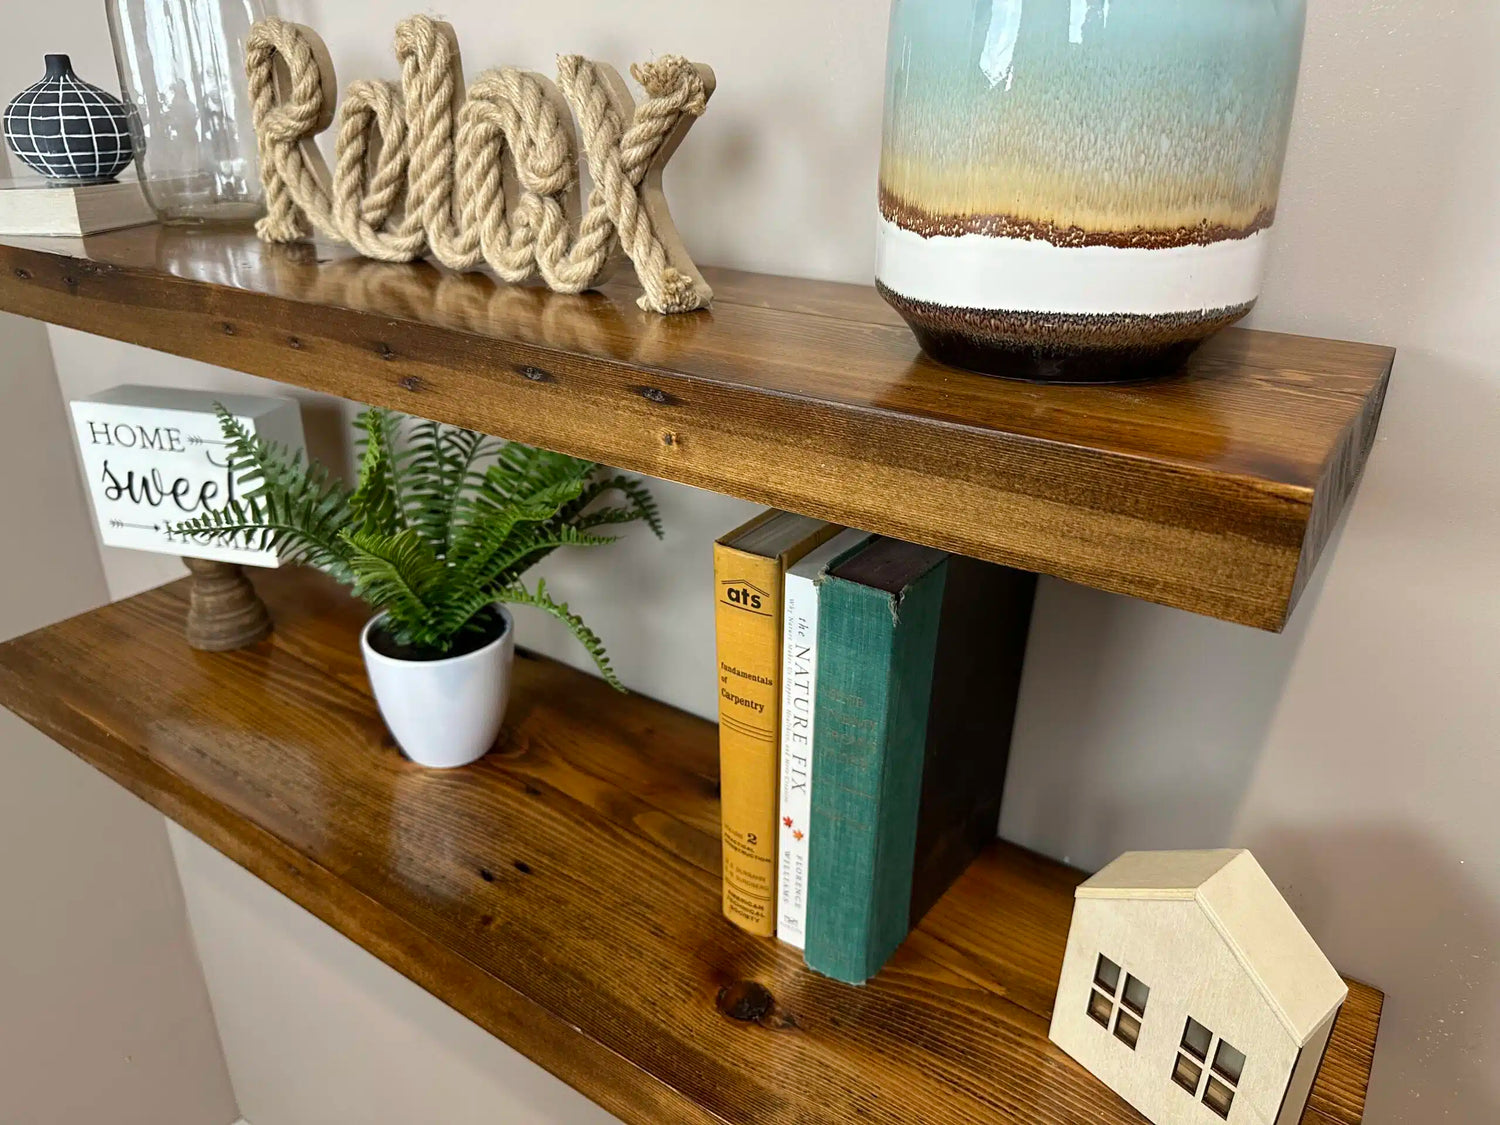 two reclaimed wood floating wall shelves in the contemporary collection and early american finish. Shelves have a shine on them from a lacquer application and show variance in wood color, grain pattern, knots, and nail holes in the wood.